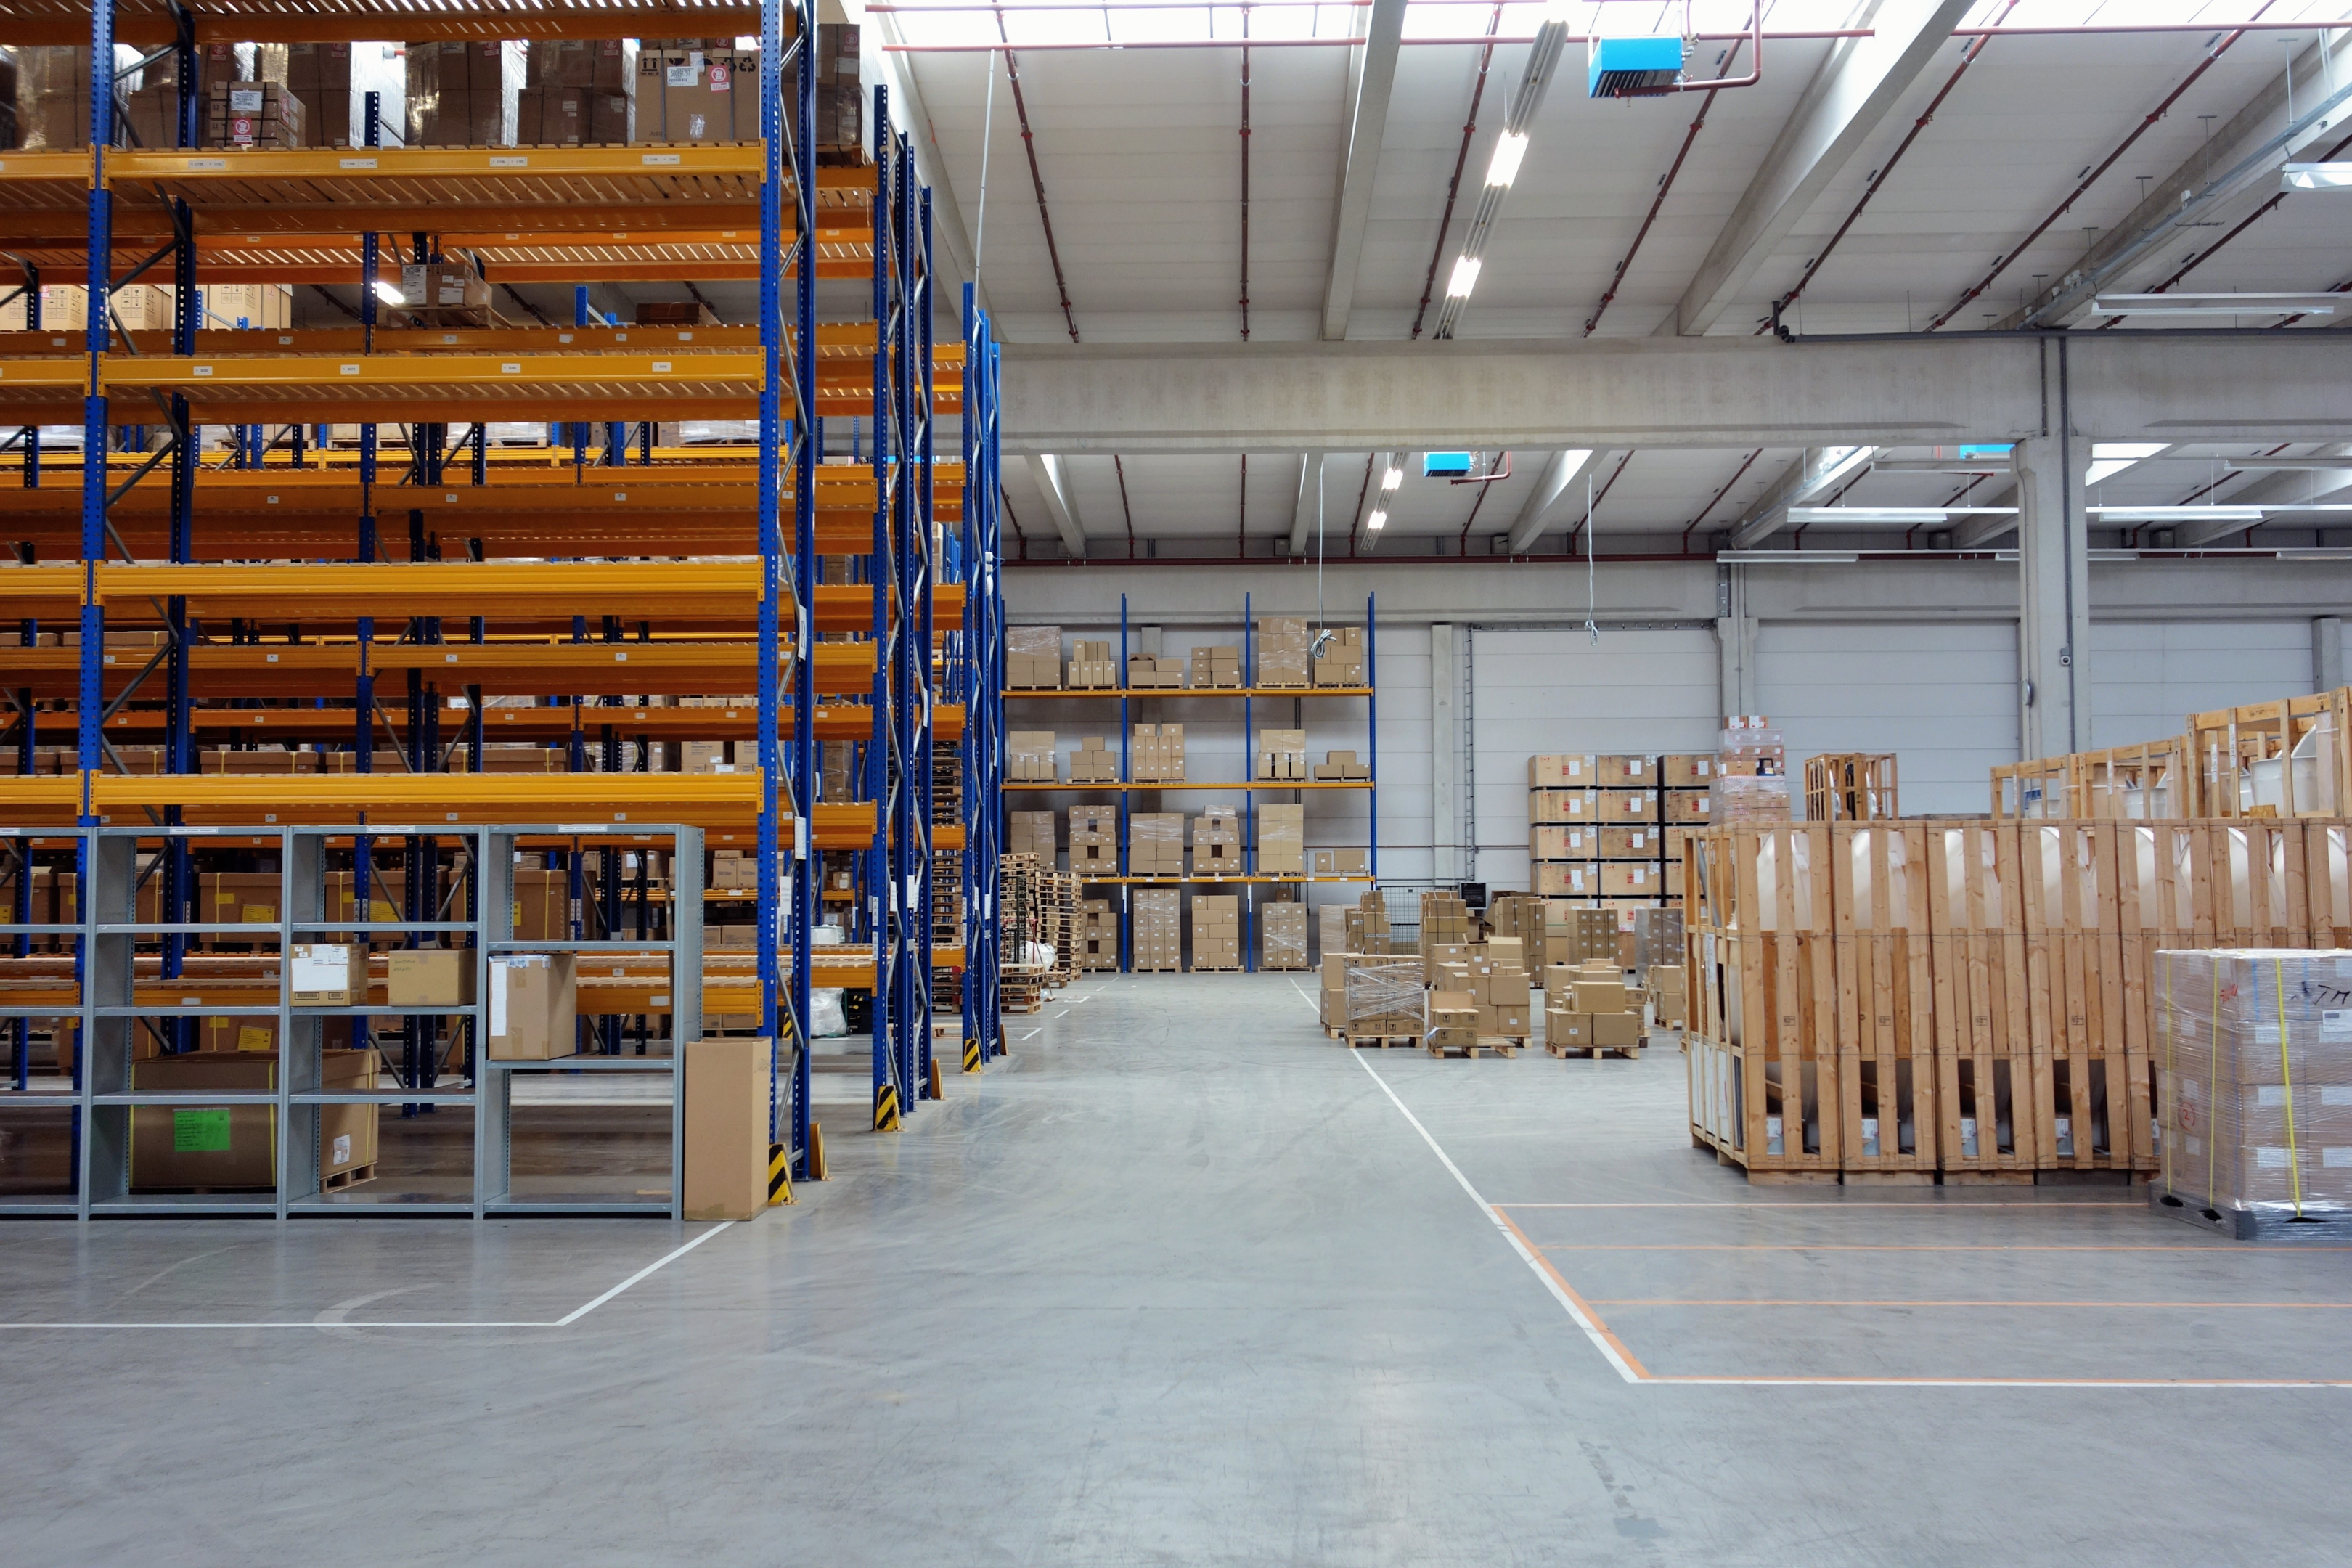 This is a photo of a warehouse with empty shelves on the left and pallets to the right.